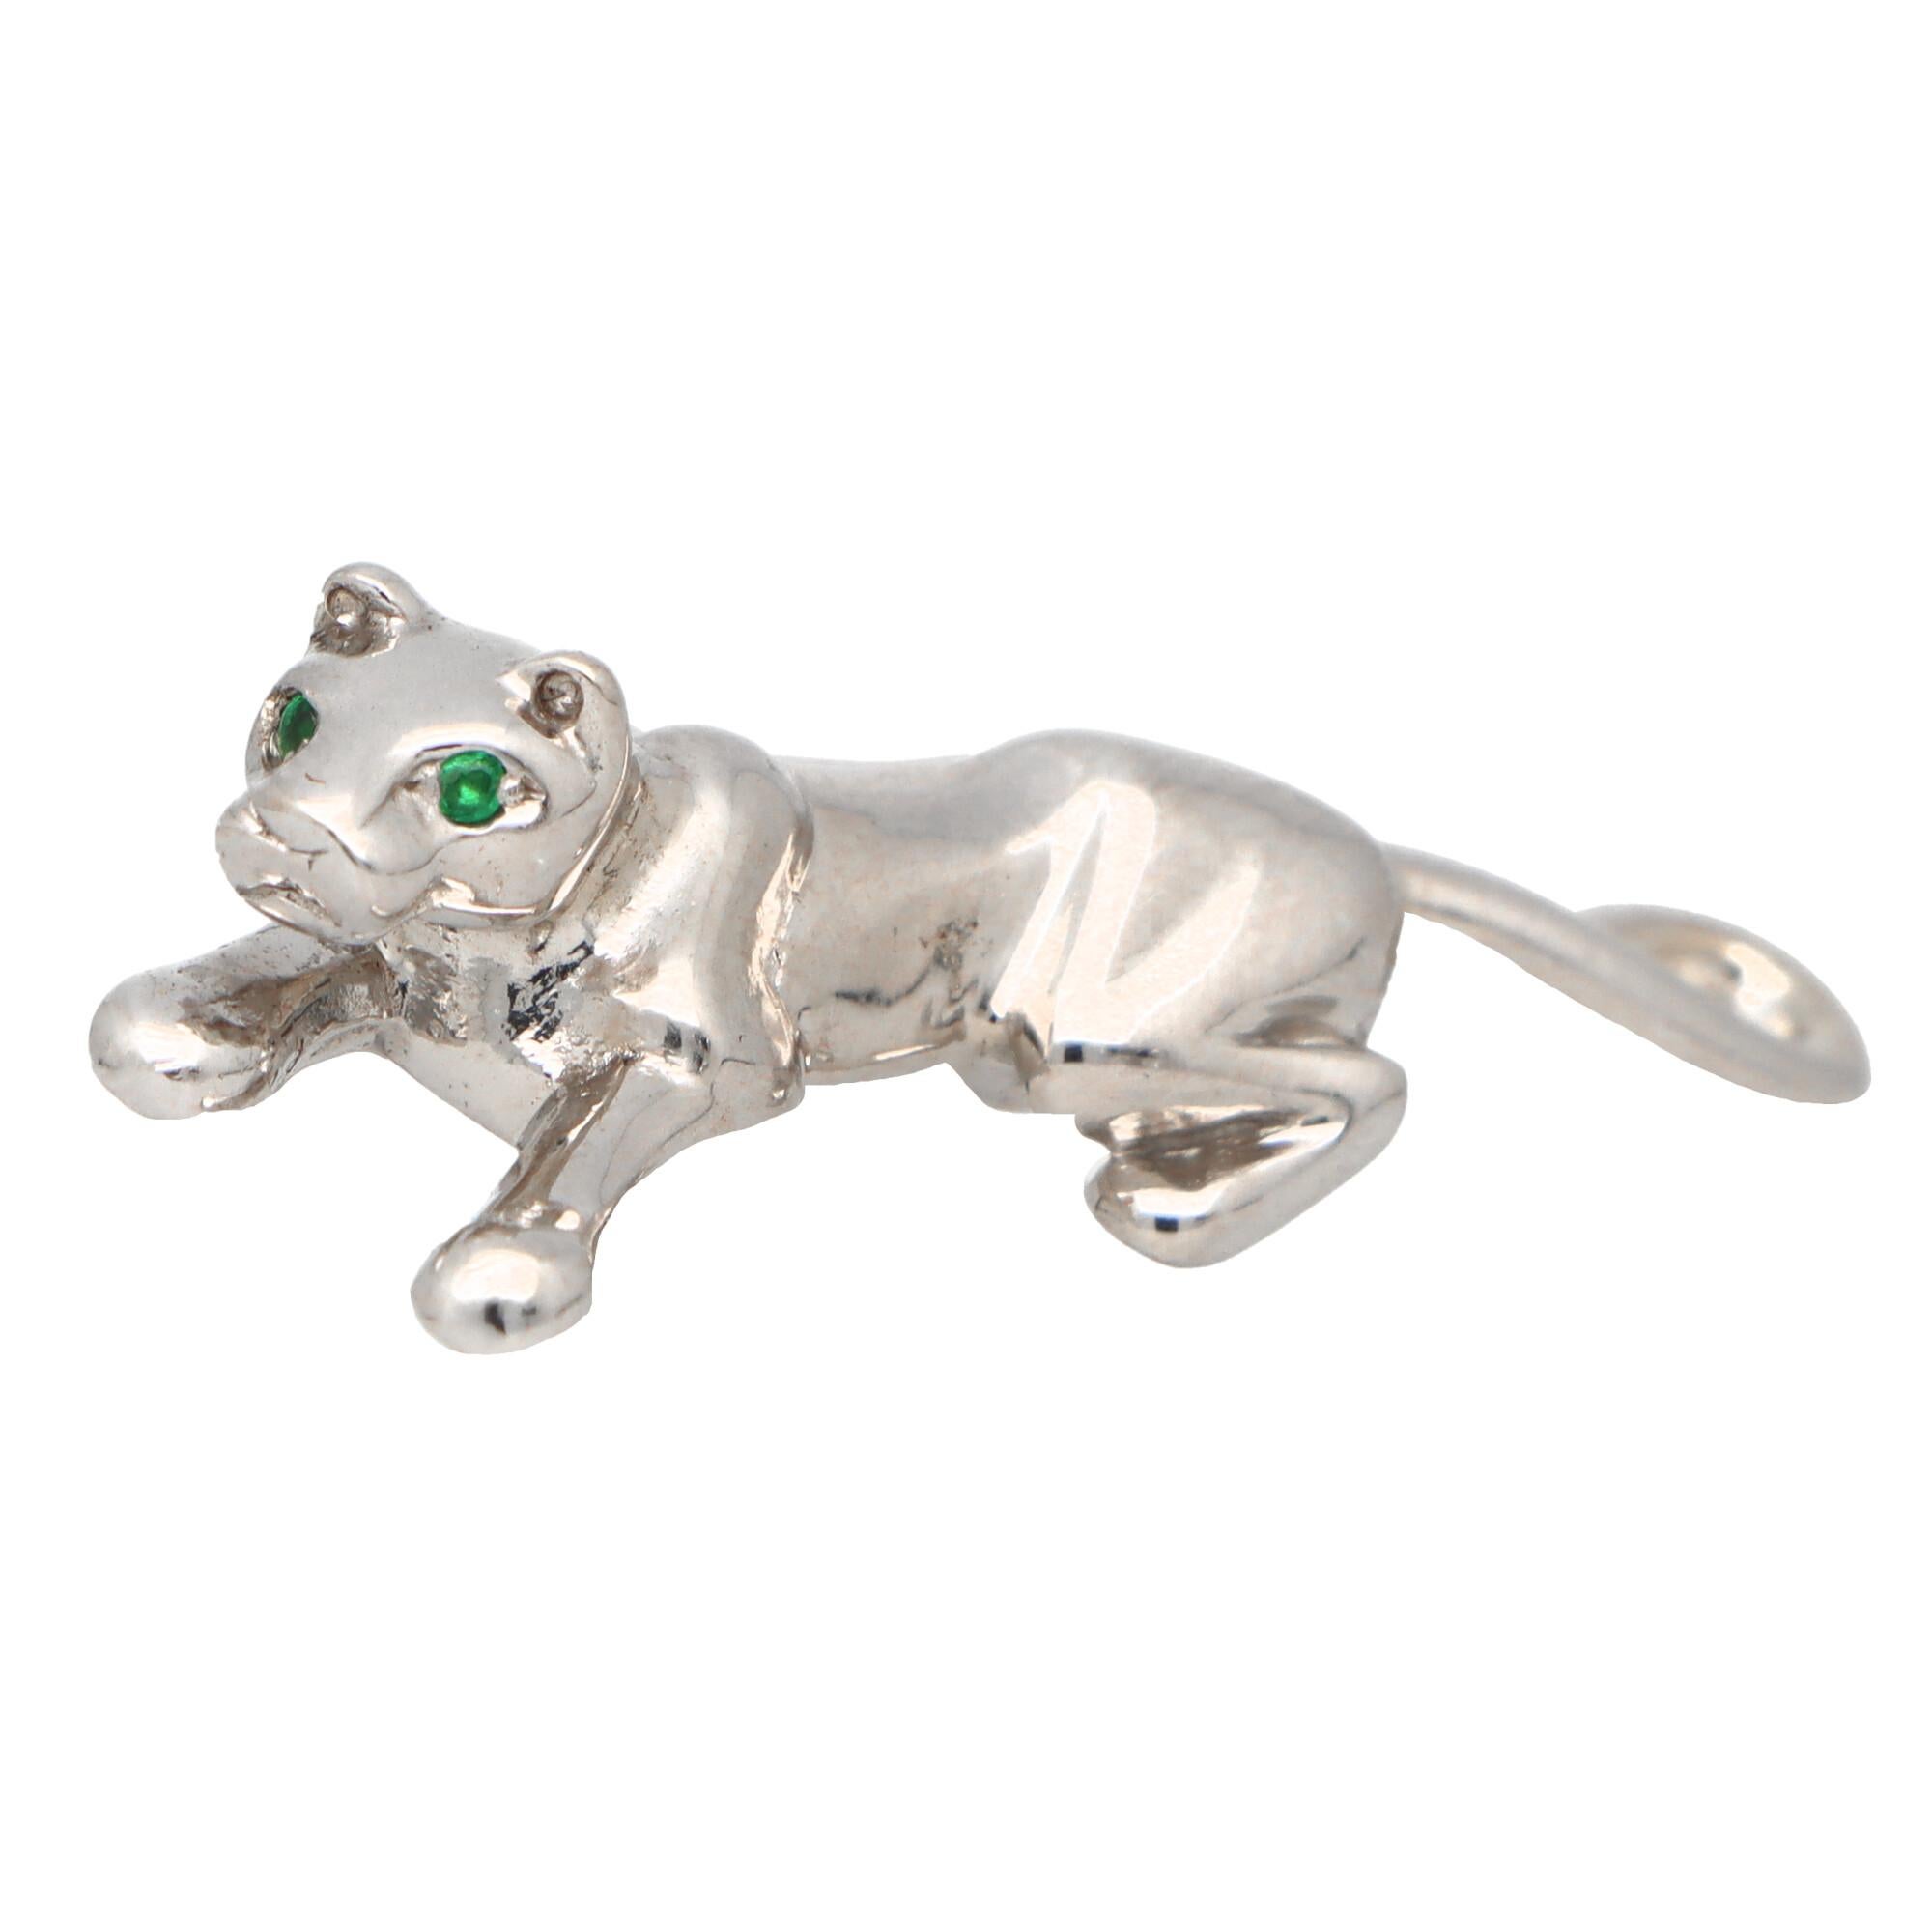 Vintage Cartier Panther Pin/Brooch Set in 18k White Gold with Emerald Eyes